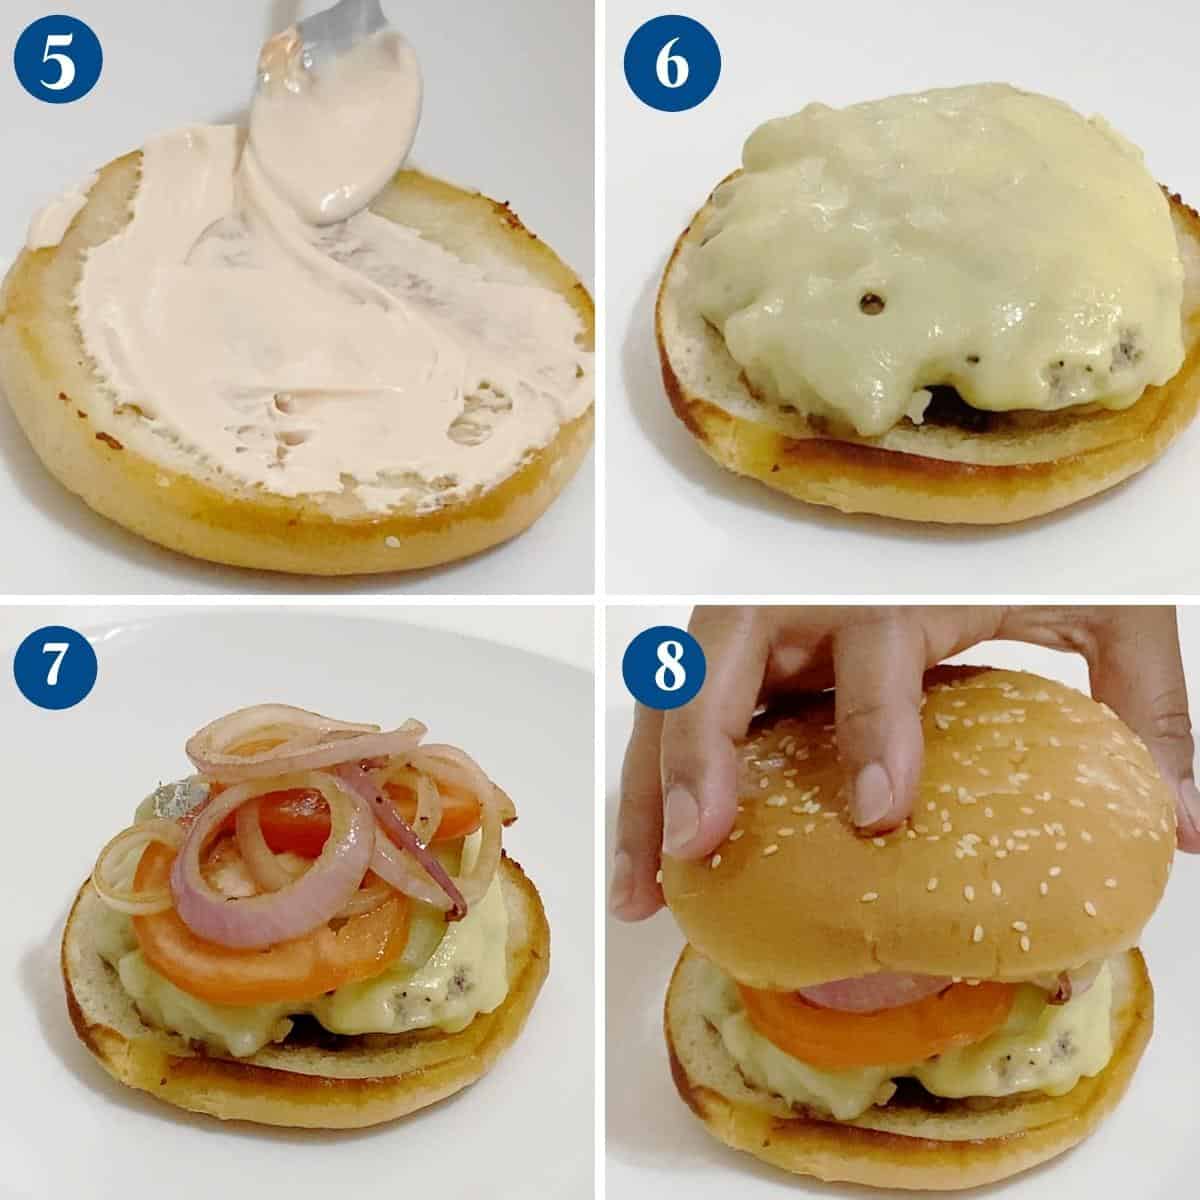 Progress pictures how to stack a burger.